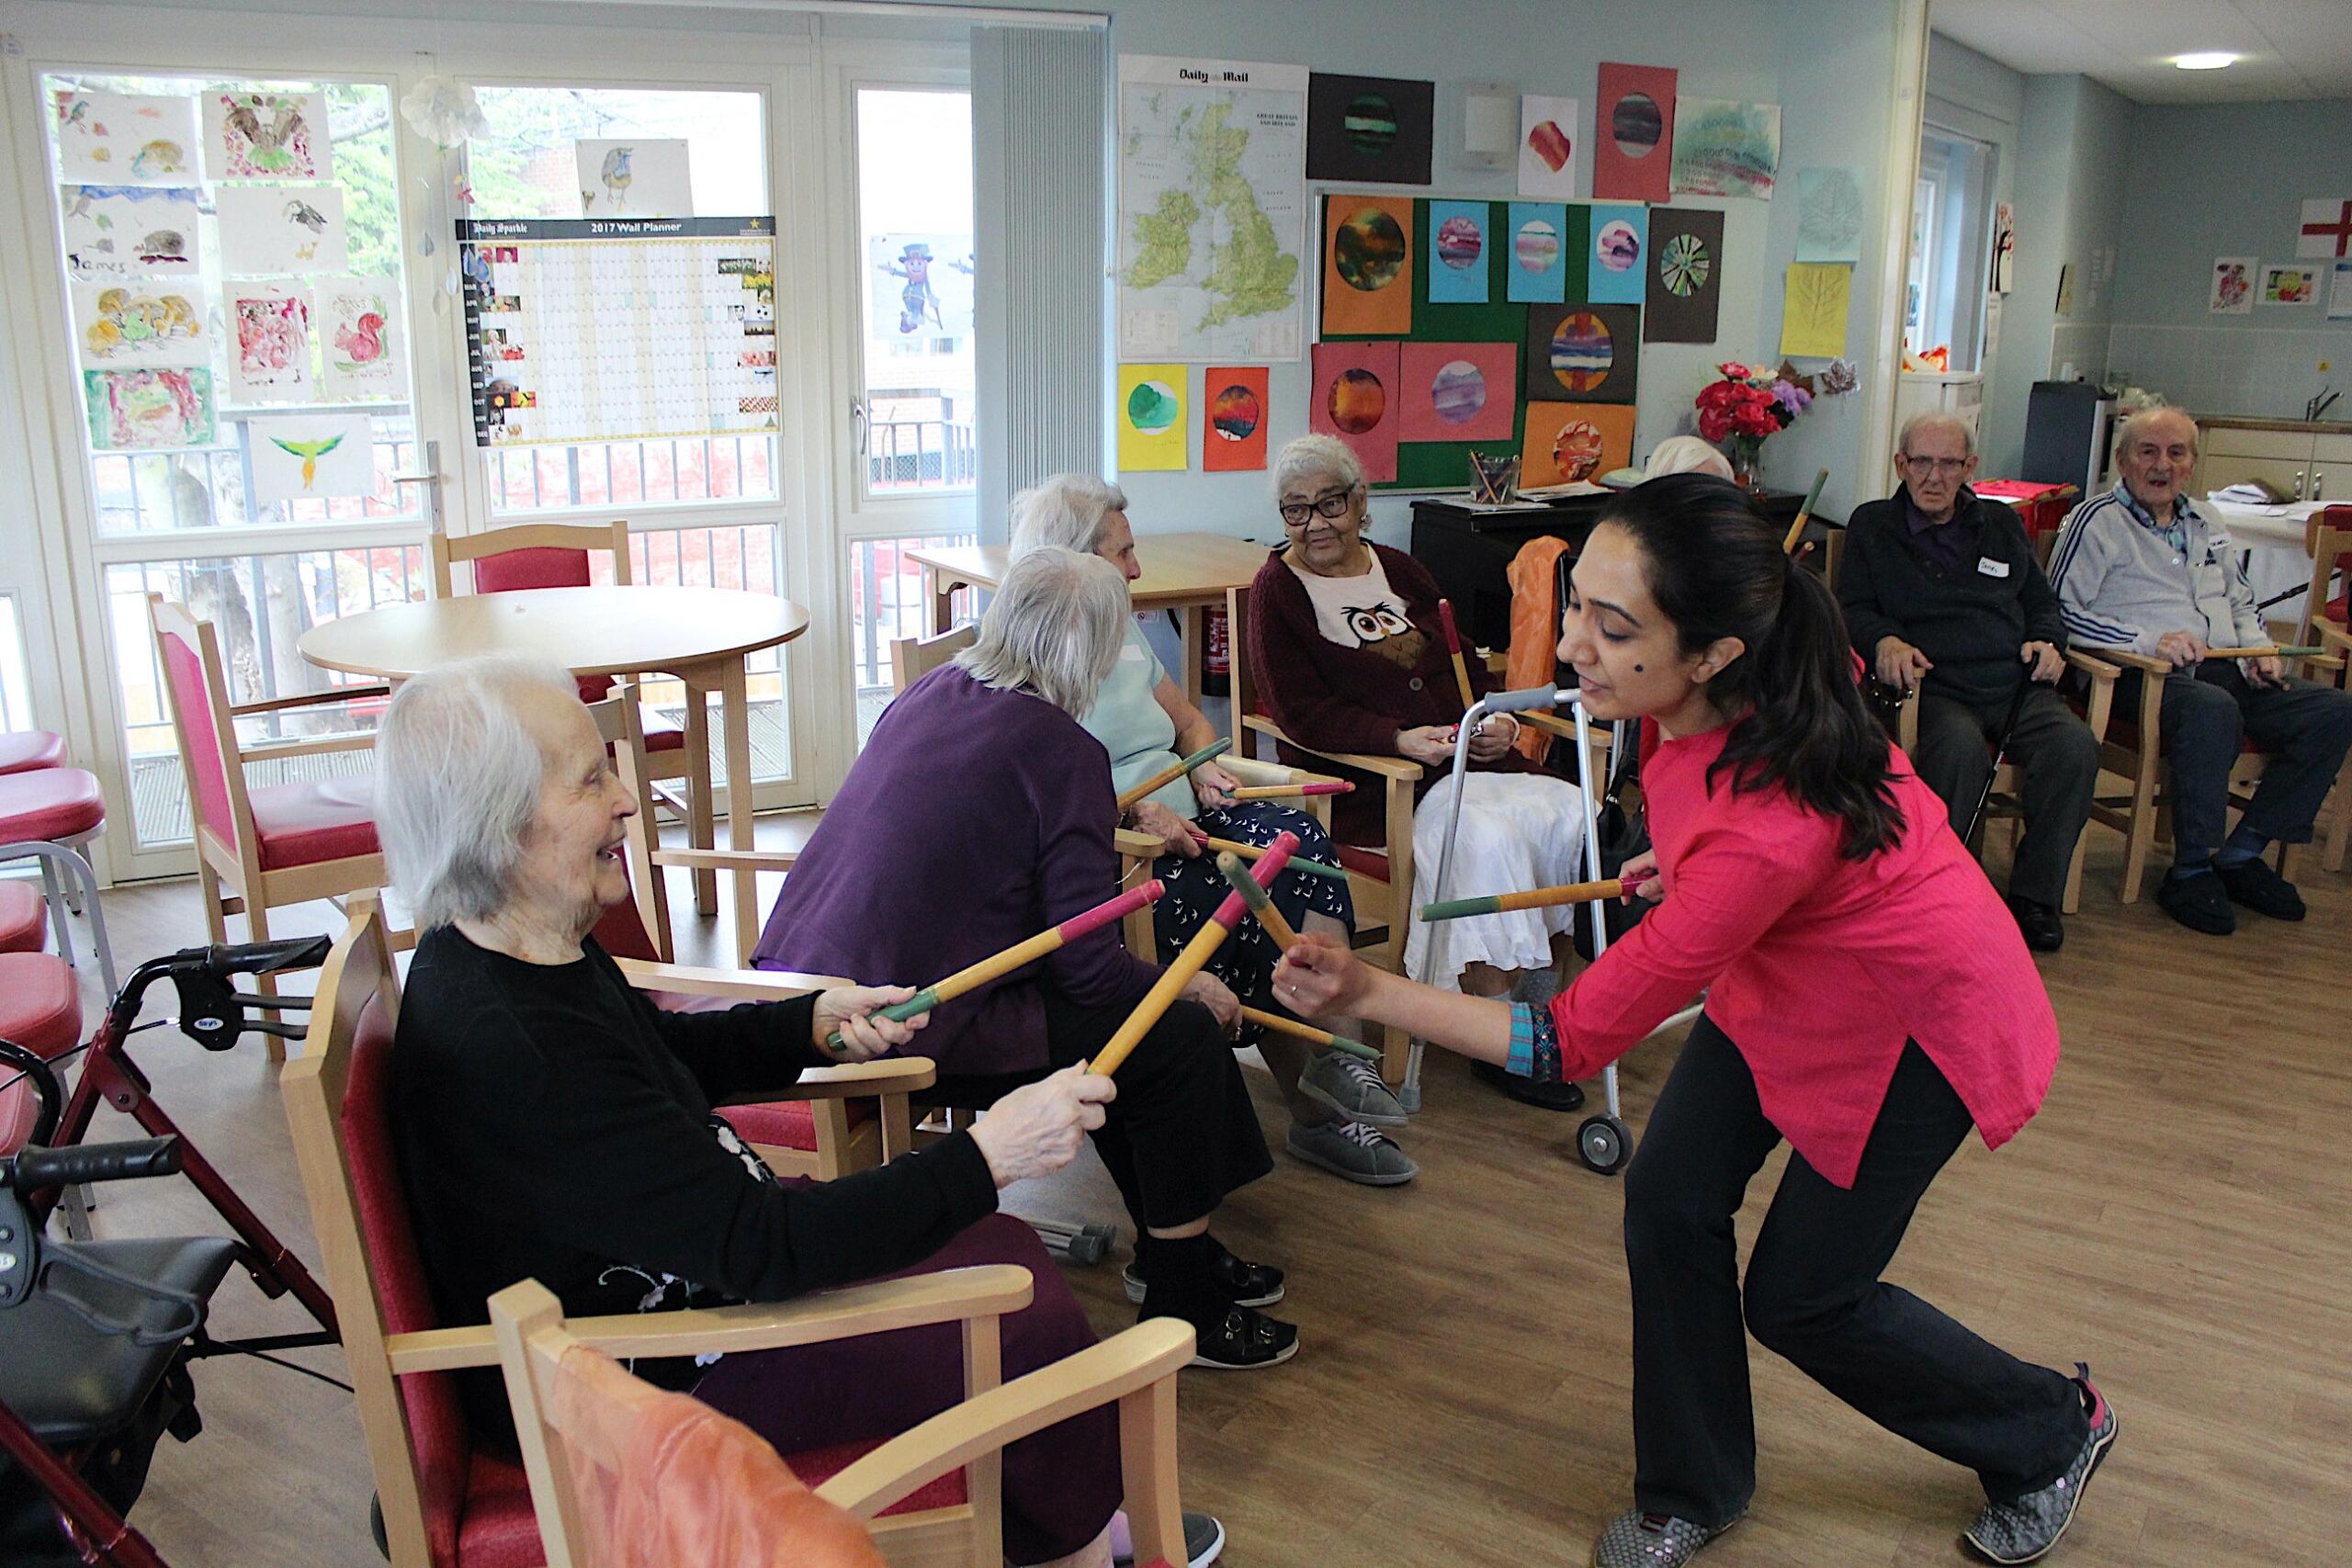 Akademi Dance Well session at Wellesley Road Care Home, led by artist Archita Kumar